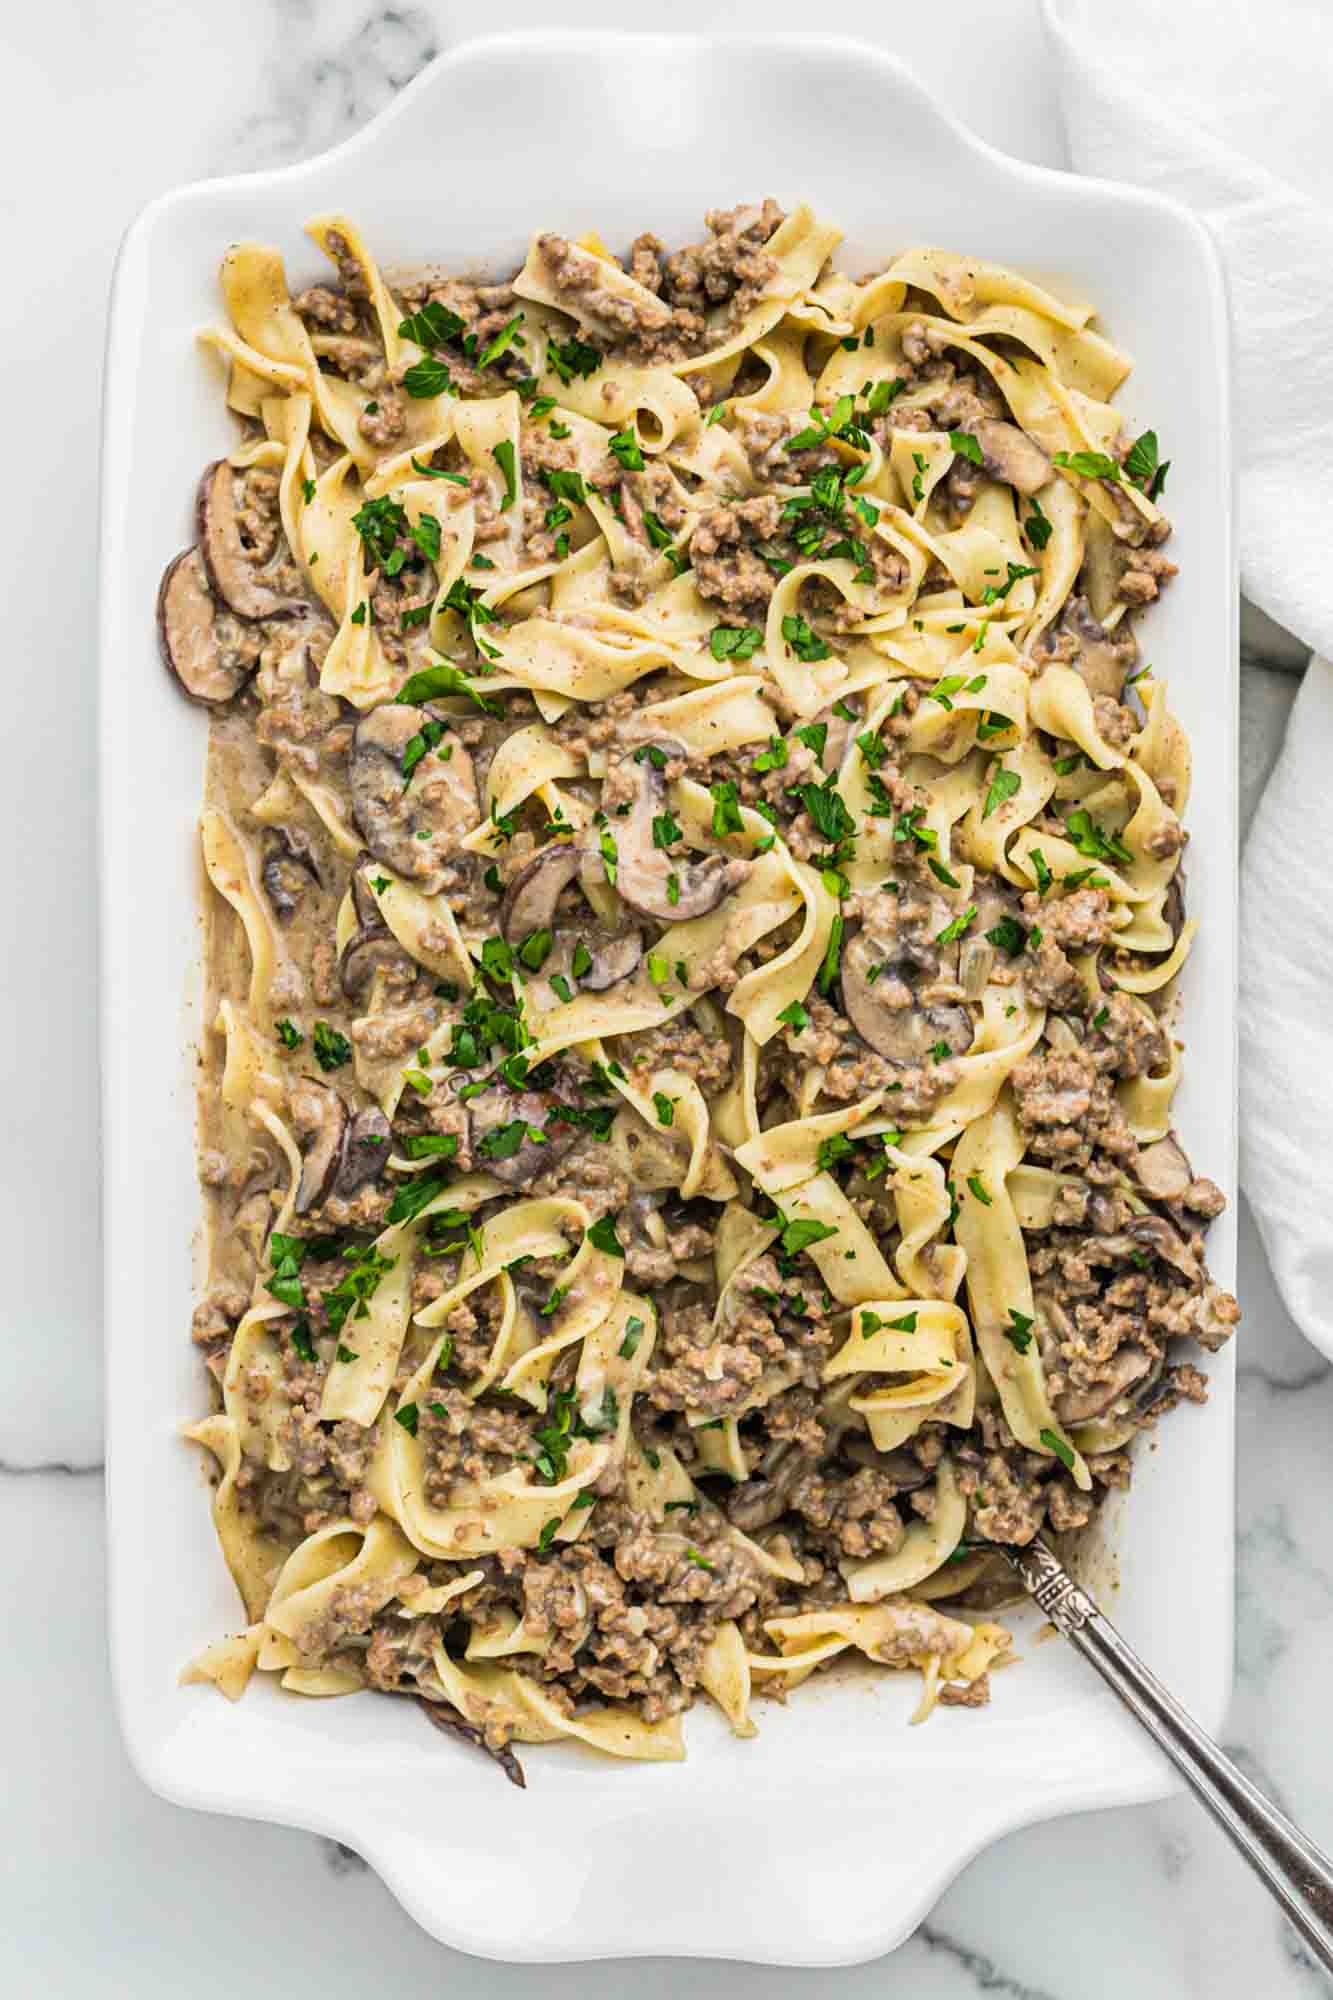 Overhead shot of ground beef stroganoff served in a white casserole dish, garnished with fresh parsley leaves